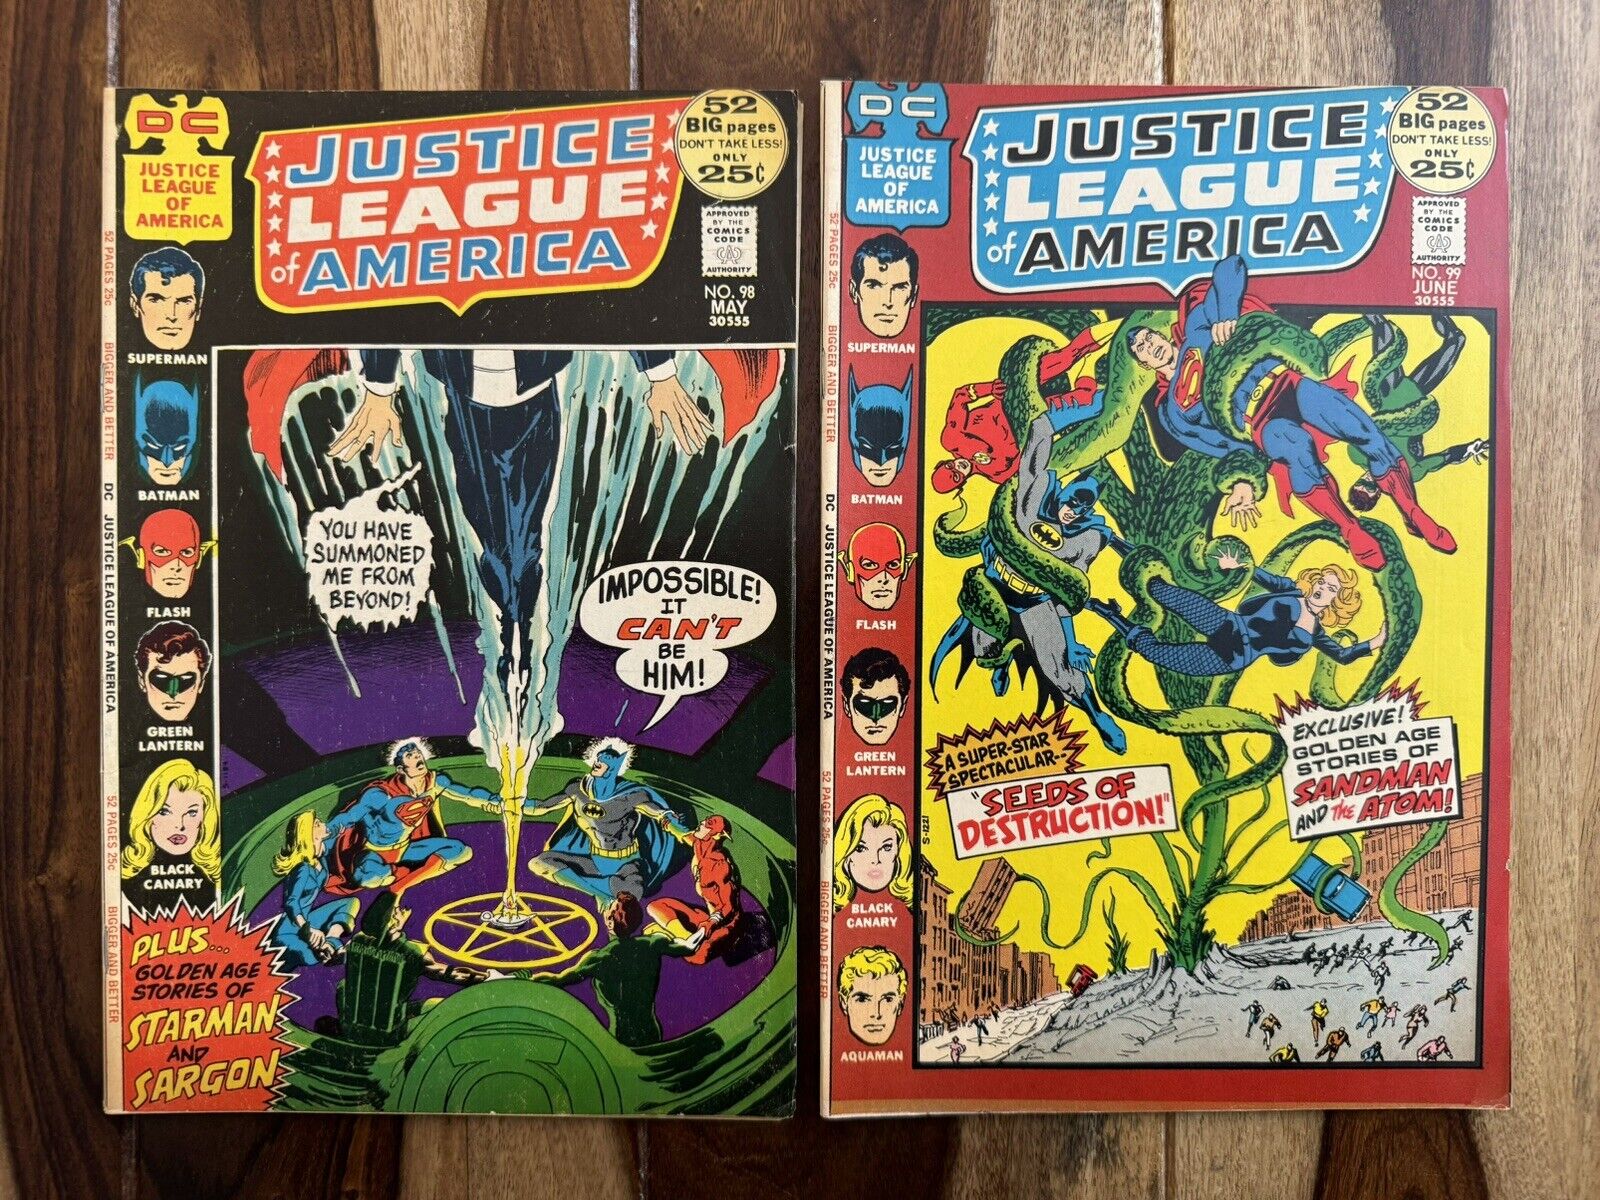 JUSTICE LEAGUE OF AMERICA #98-#99-TWO BOOK SET-1ST APPEARANCE BUR-SED-NEAL ADAMS